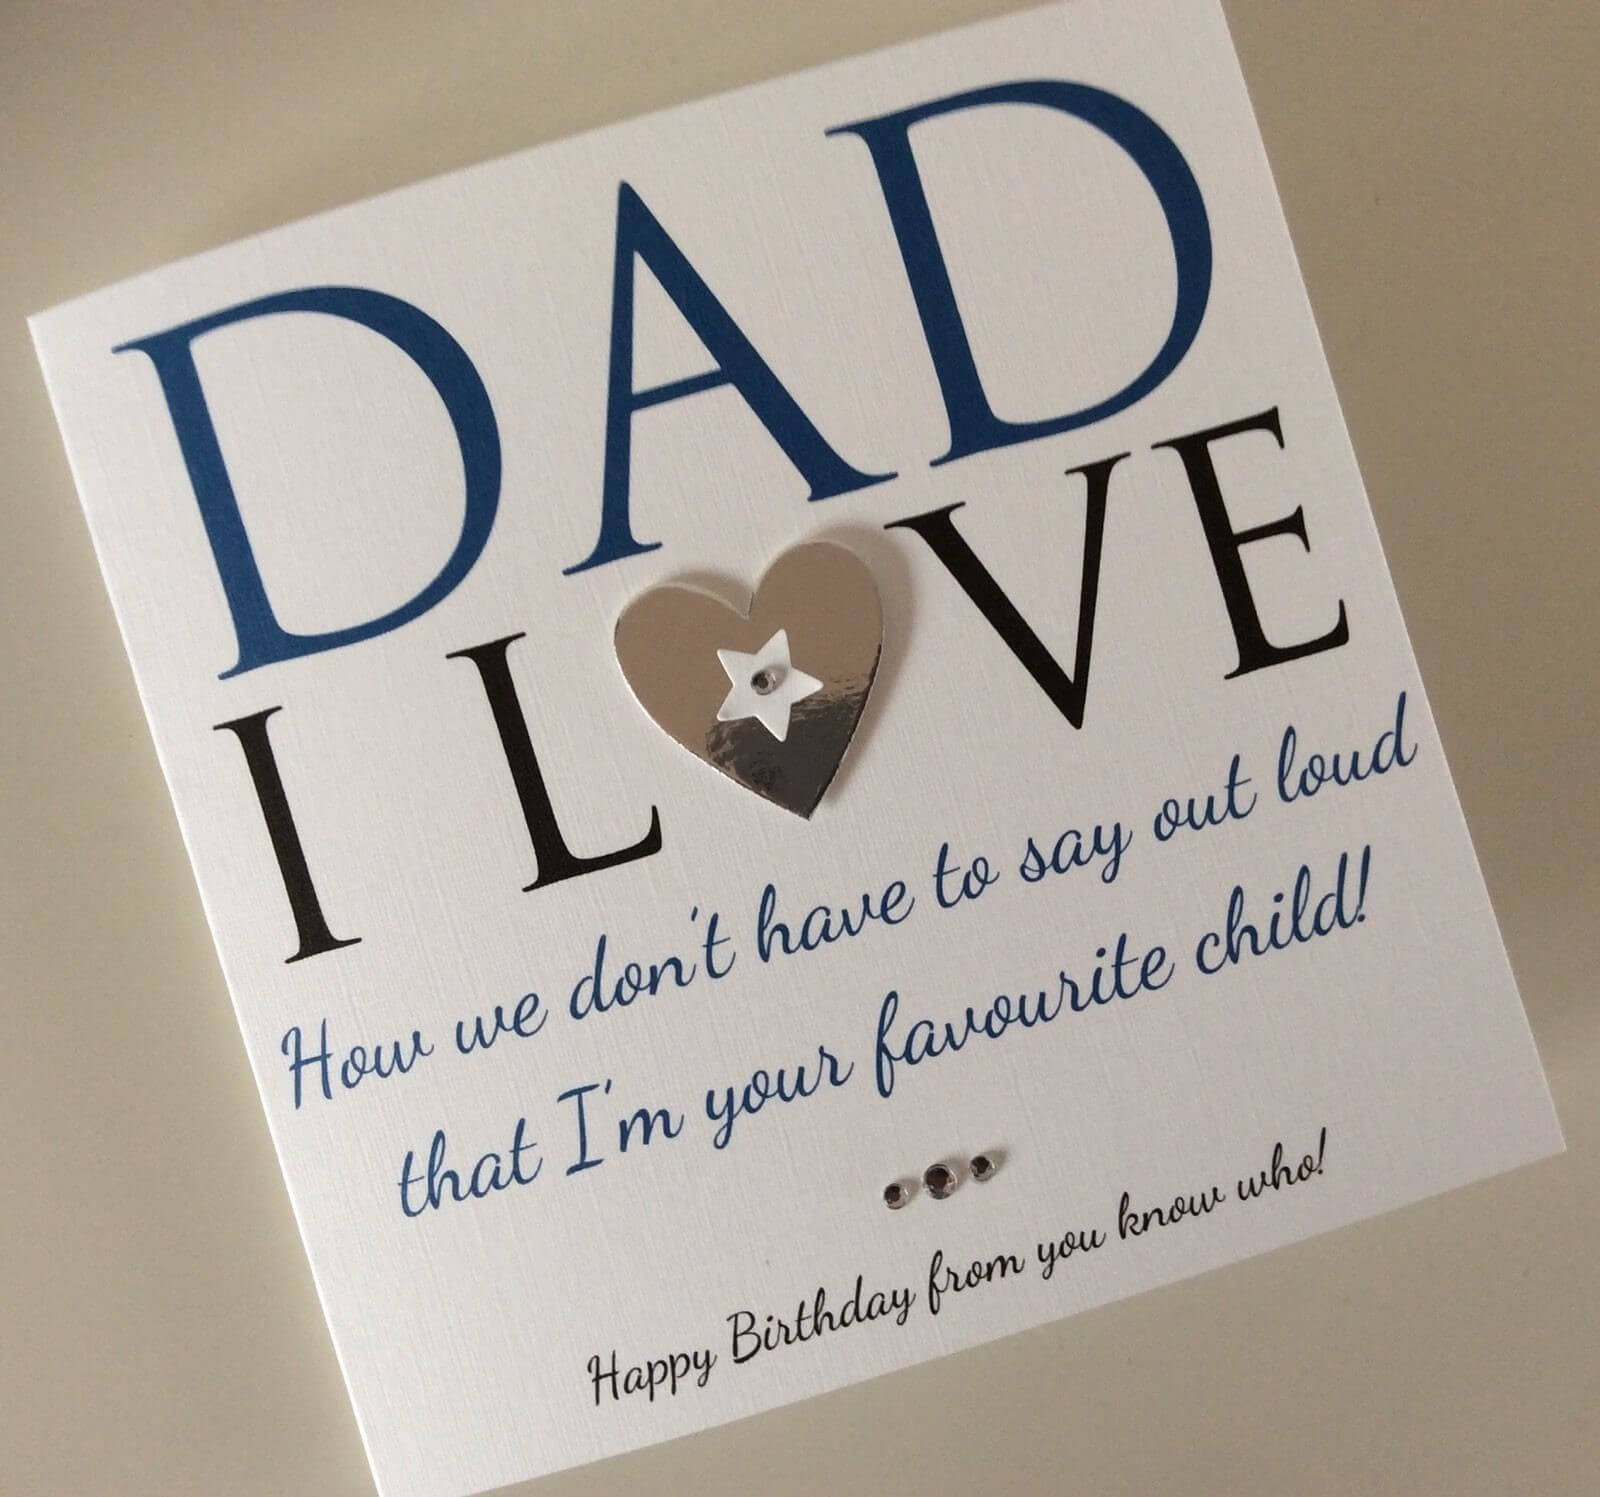 Birthday Card Ideas For Dads Birthday Card Ideas For Dad Examples And Forms